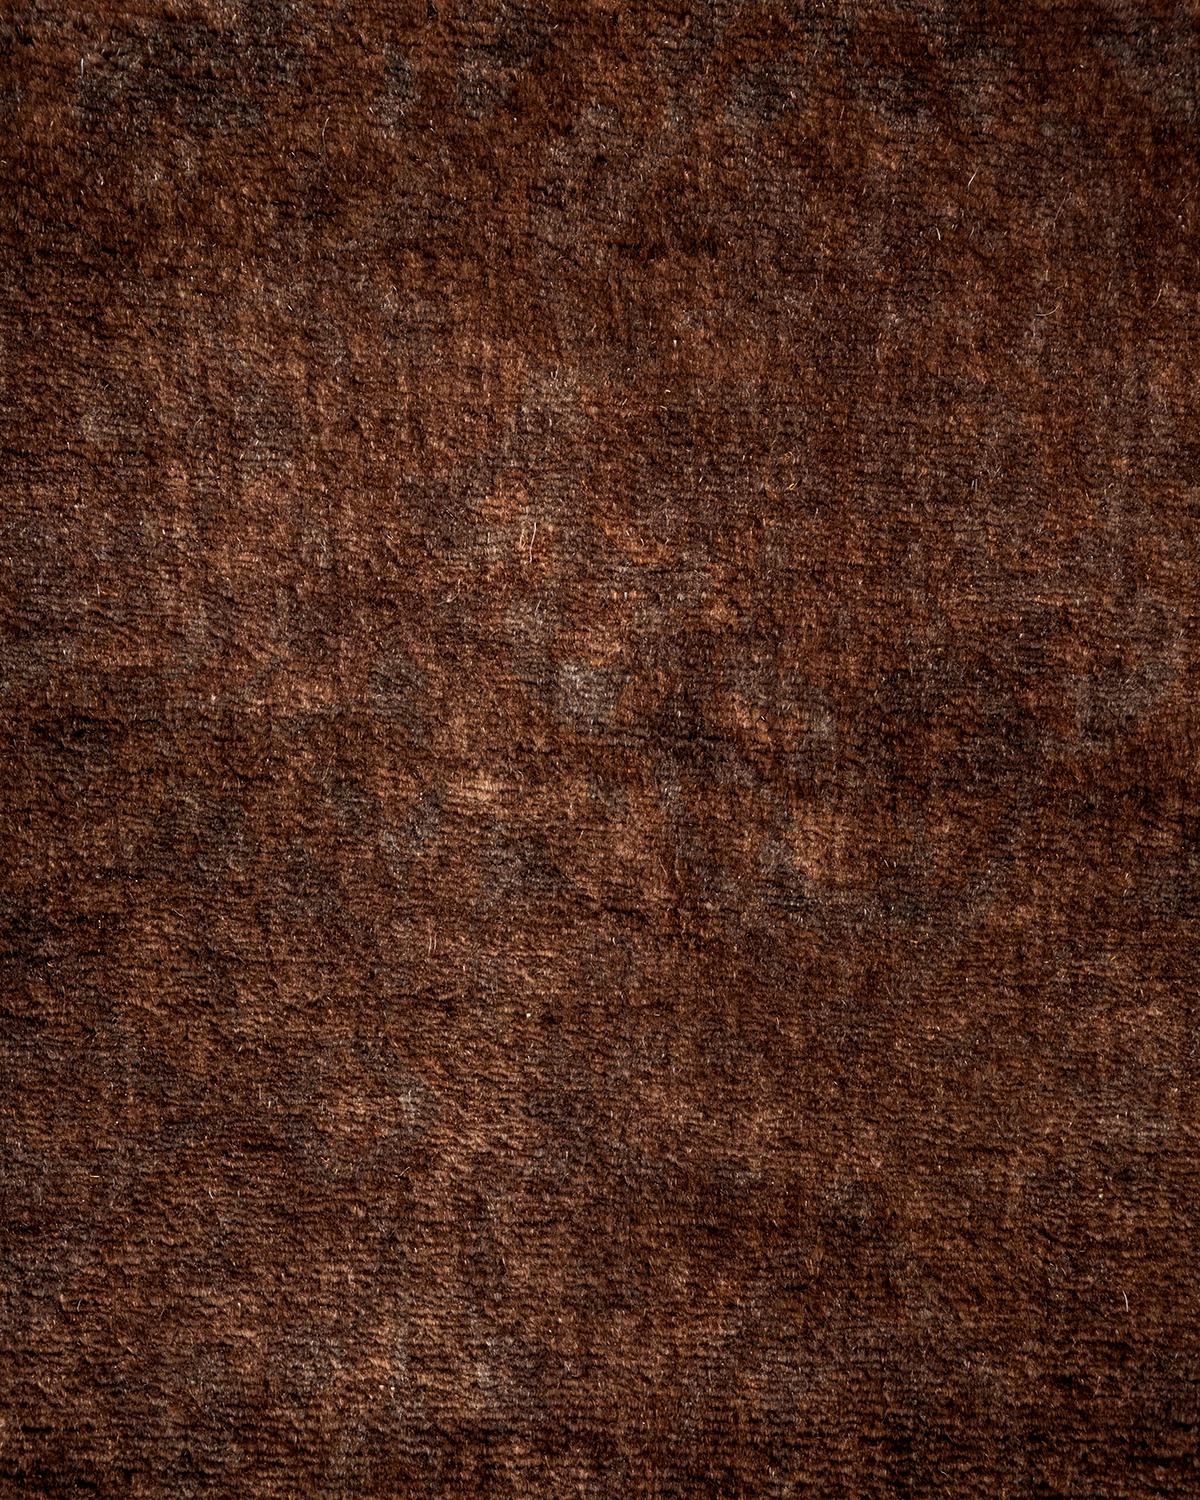 Pakistani Overdyed Hand Knotted Wool Brown Area Rug For Sale